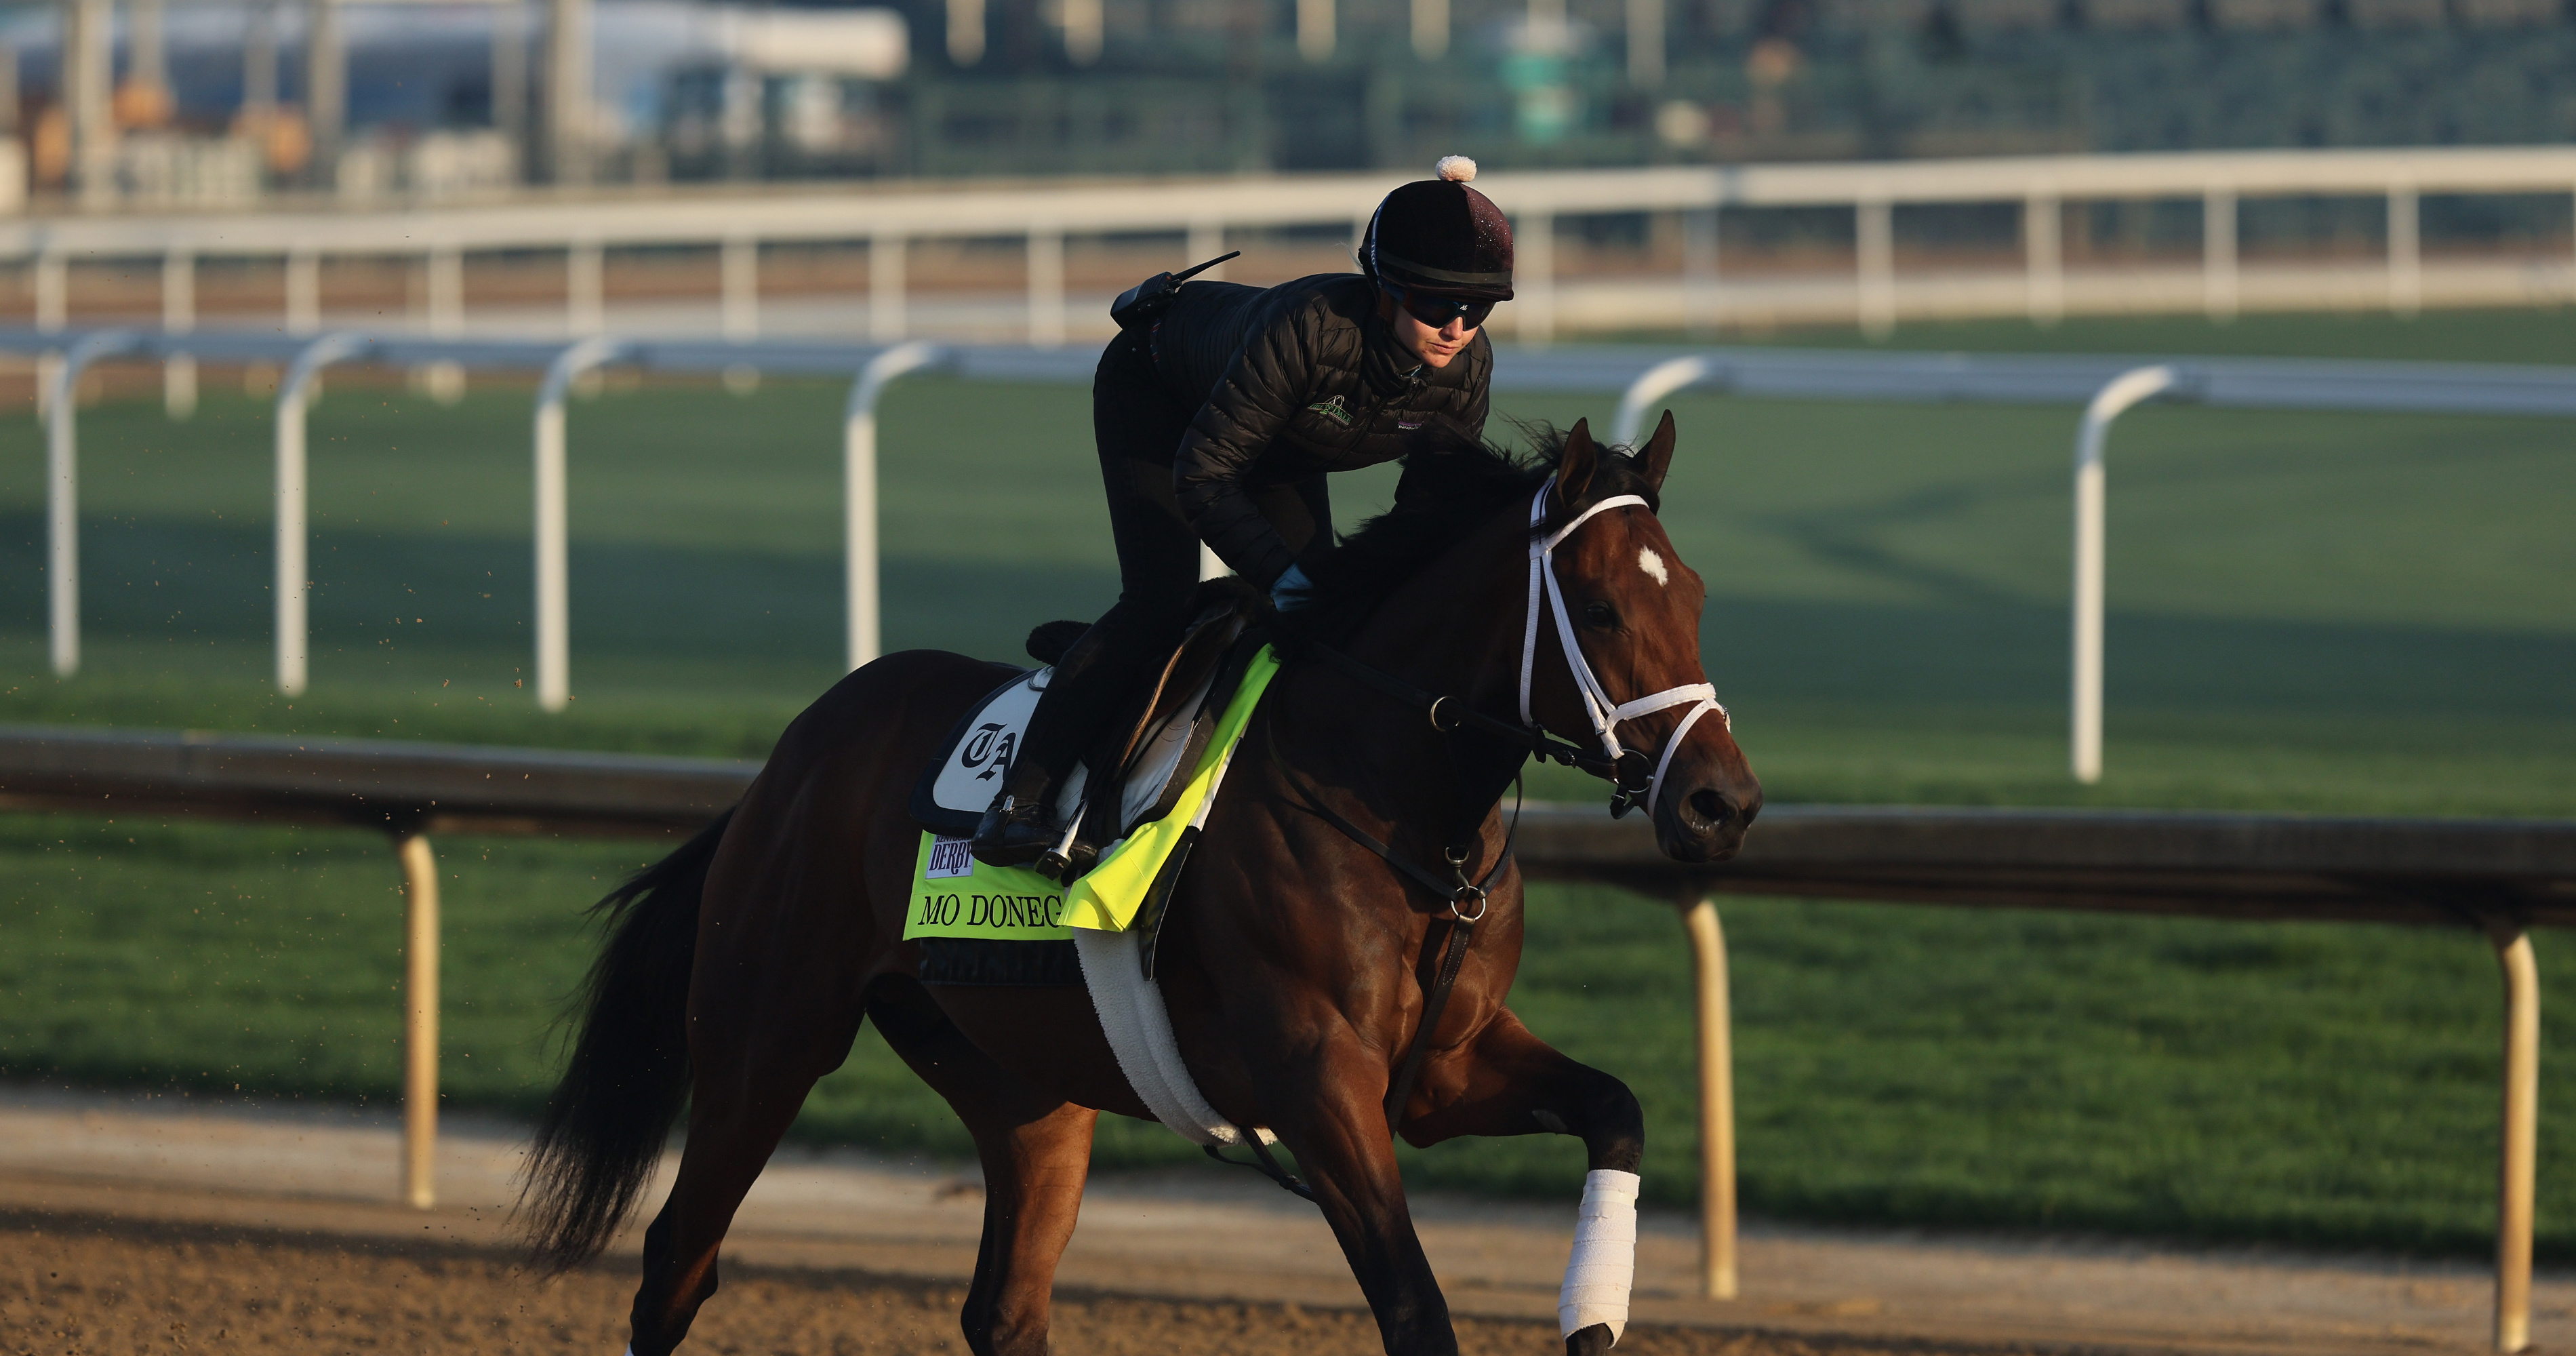 Kentucky Derby 2022 Post Positions Complete Listing for Every Horse